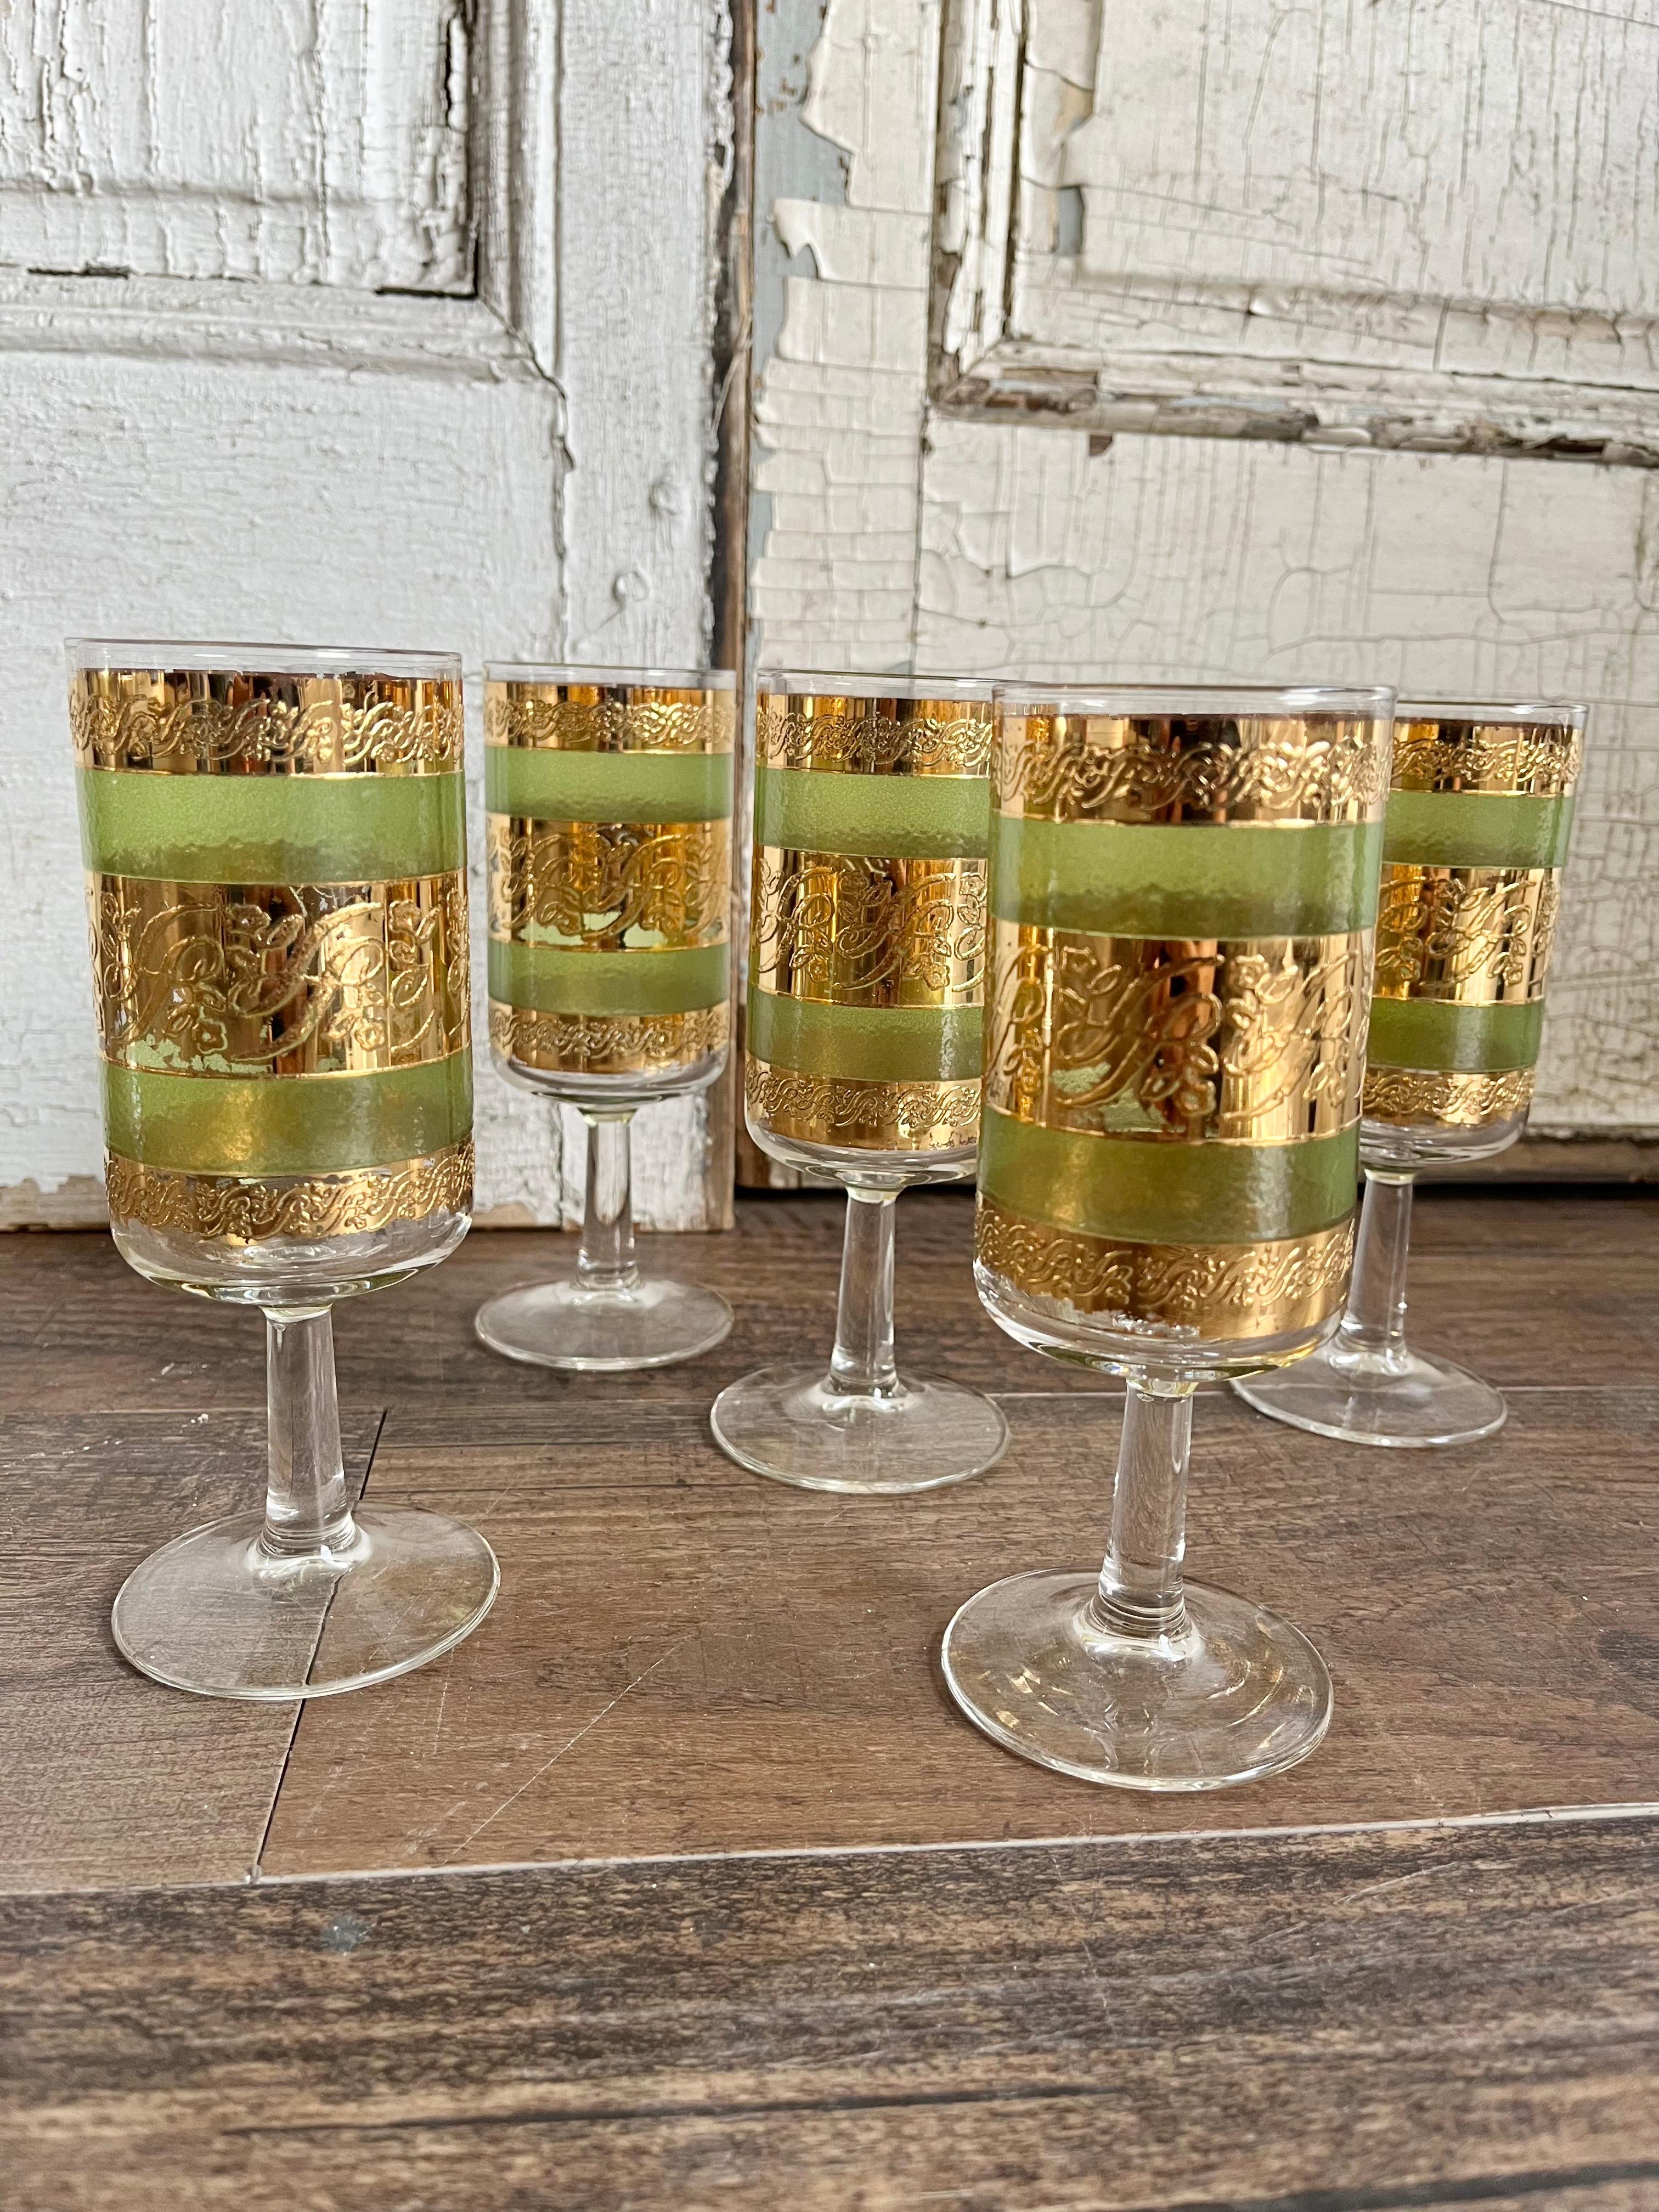 This set of 5 cocktail glasses is a true gem from the 1960s era, featuring a stunning combination of green glass and 22K gold stems that create a unique and elegant look. The glasses are made by Culver, a company known for producing high-quality